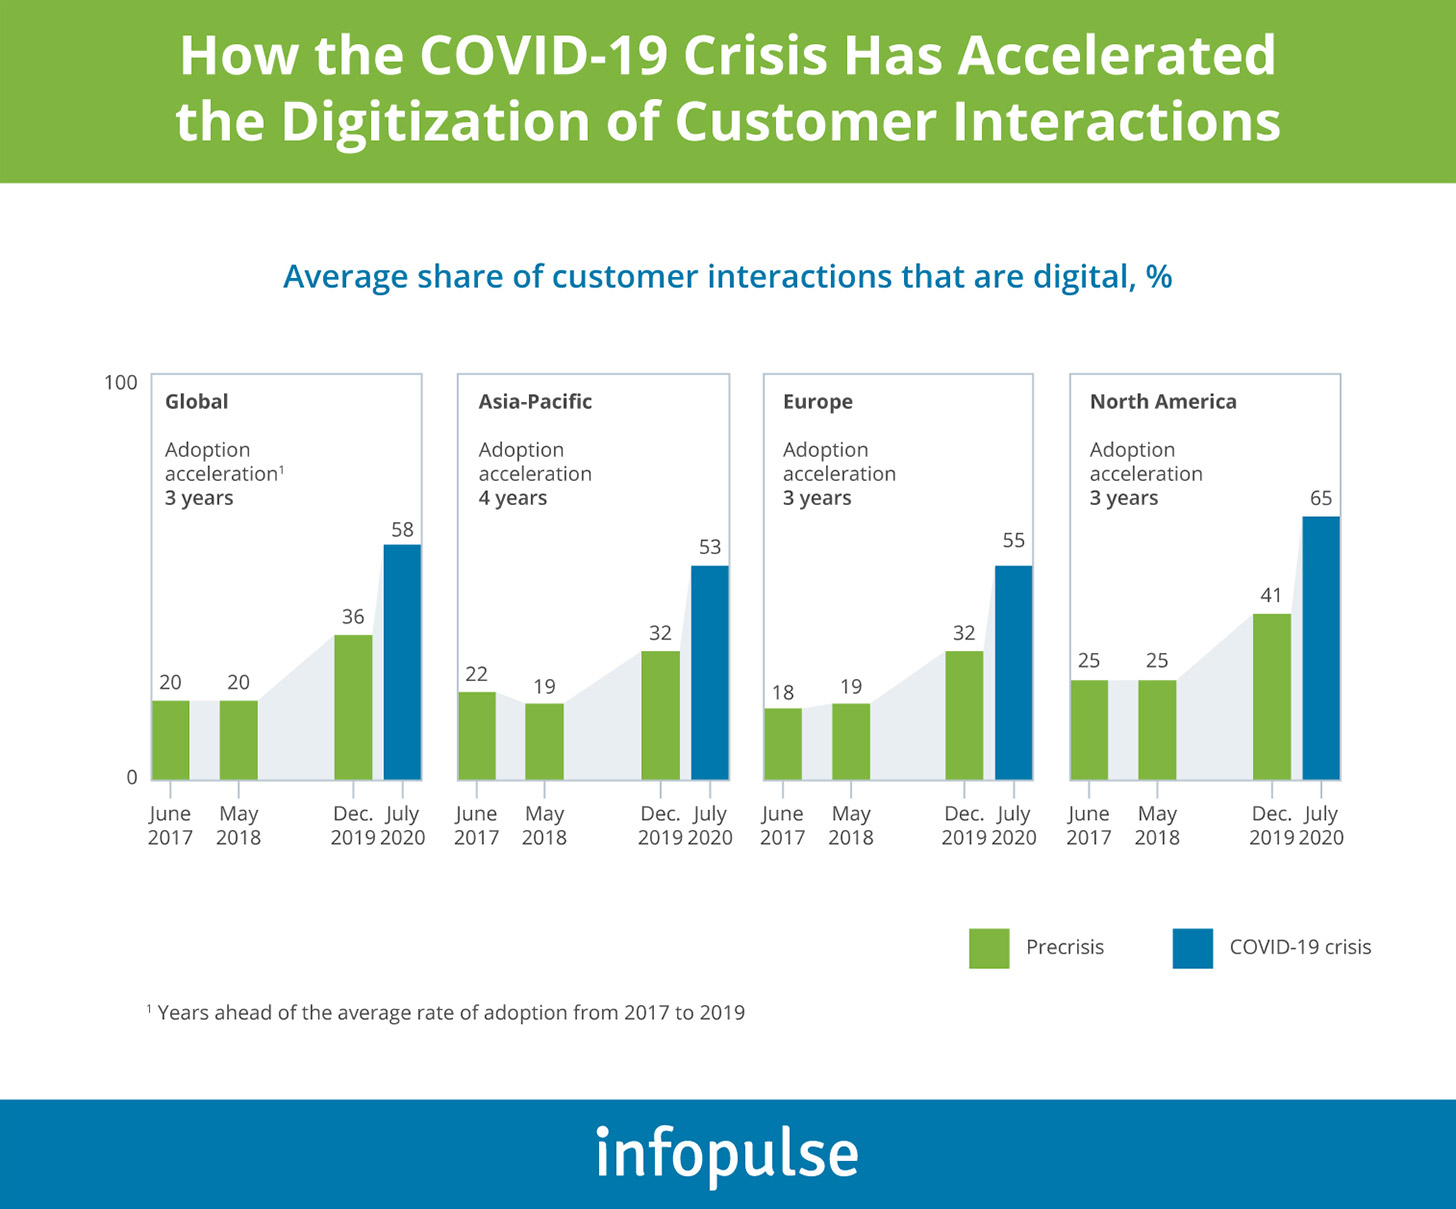 How COVID-19 accelerated the digitization of customer interactions - Infopulse